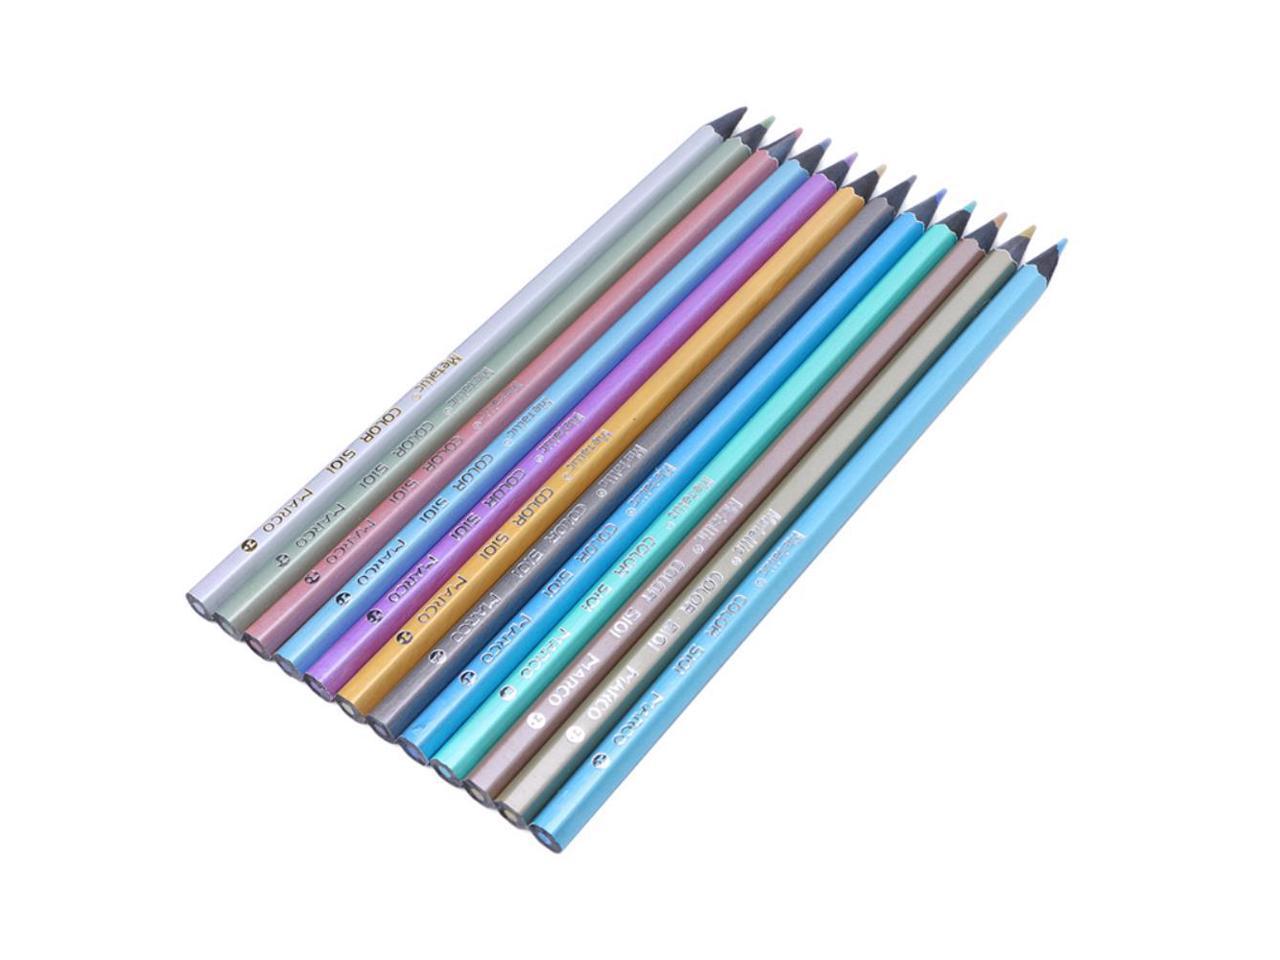 XISAOK 12 Metallic Colored Pencil Non-Toxic for Drawing Sketching Set Stationery